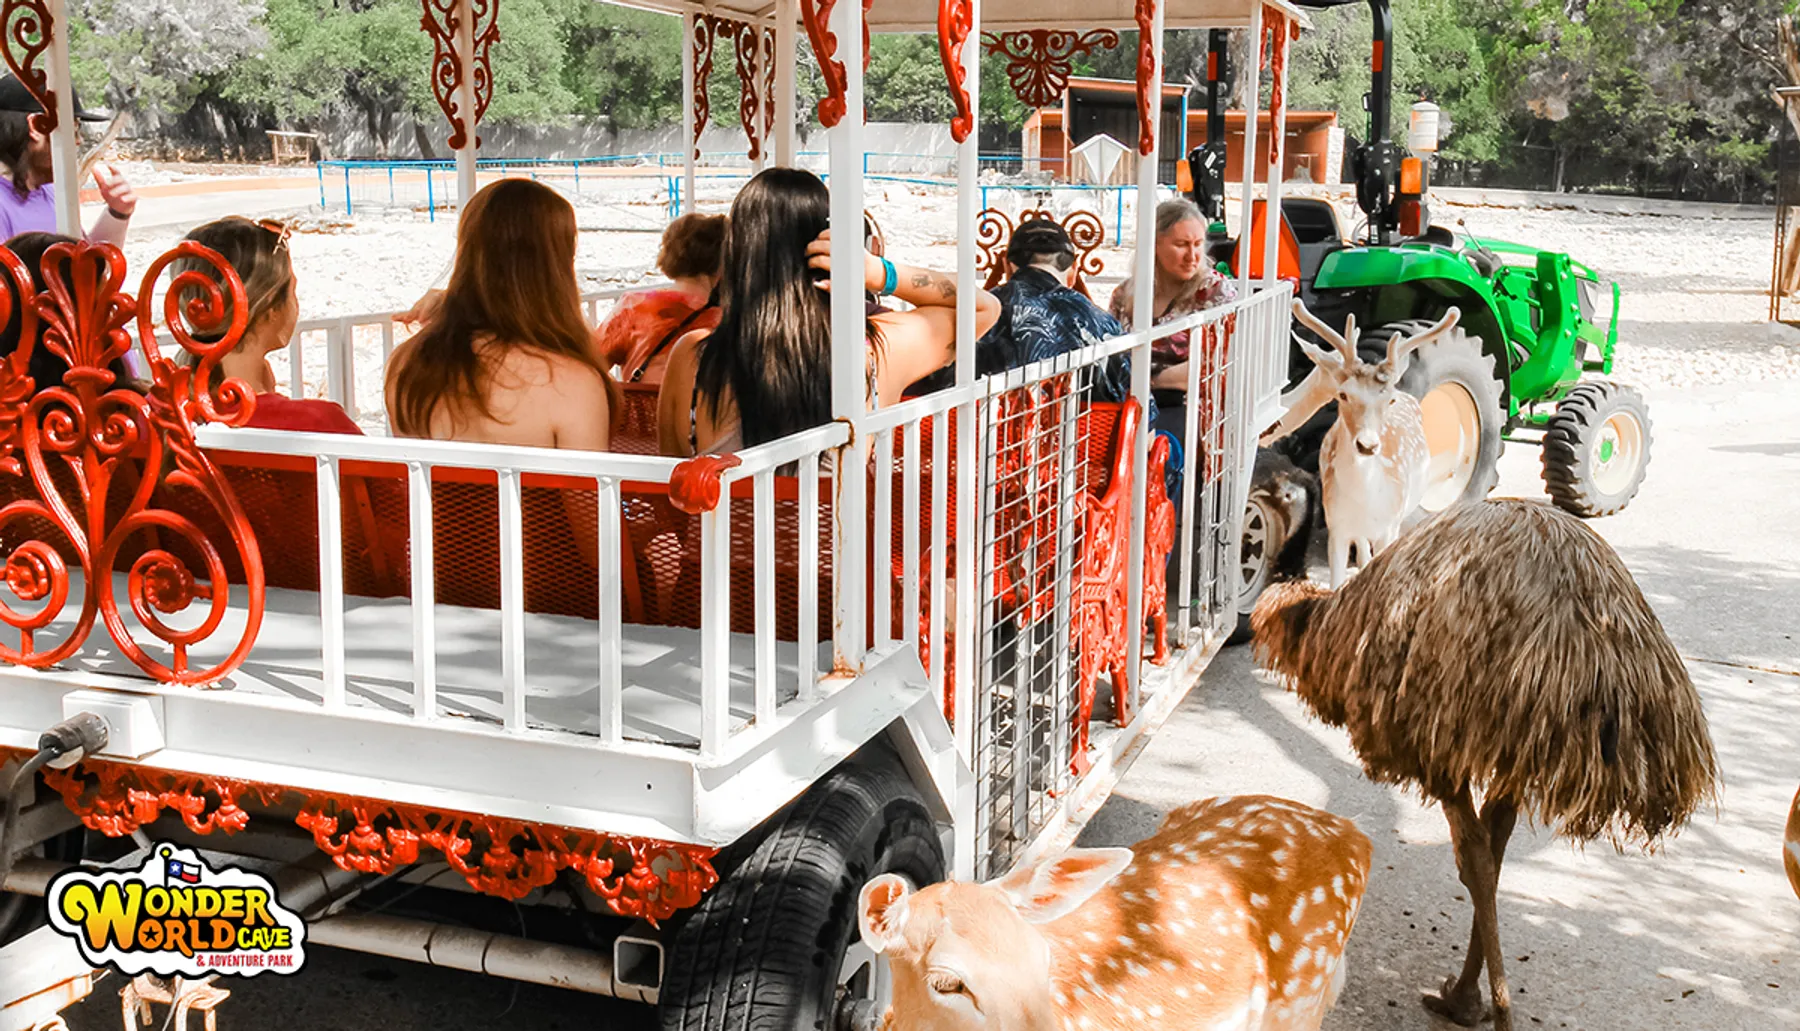 A tractor is pulling a wagon carrying people, with several animals including a deer and an emu gathered around it in what appears to be a park setting.